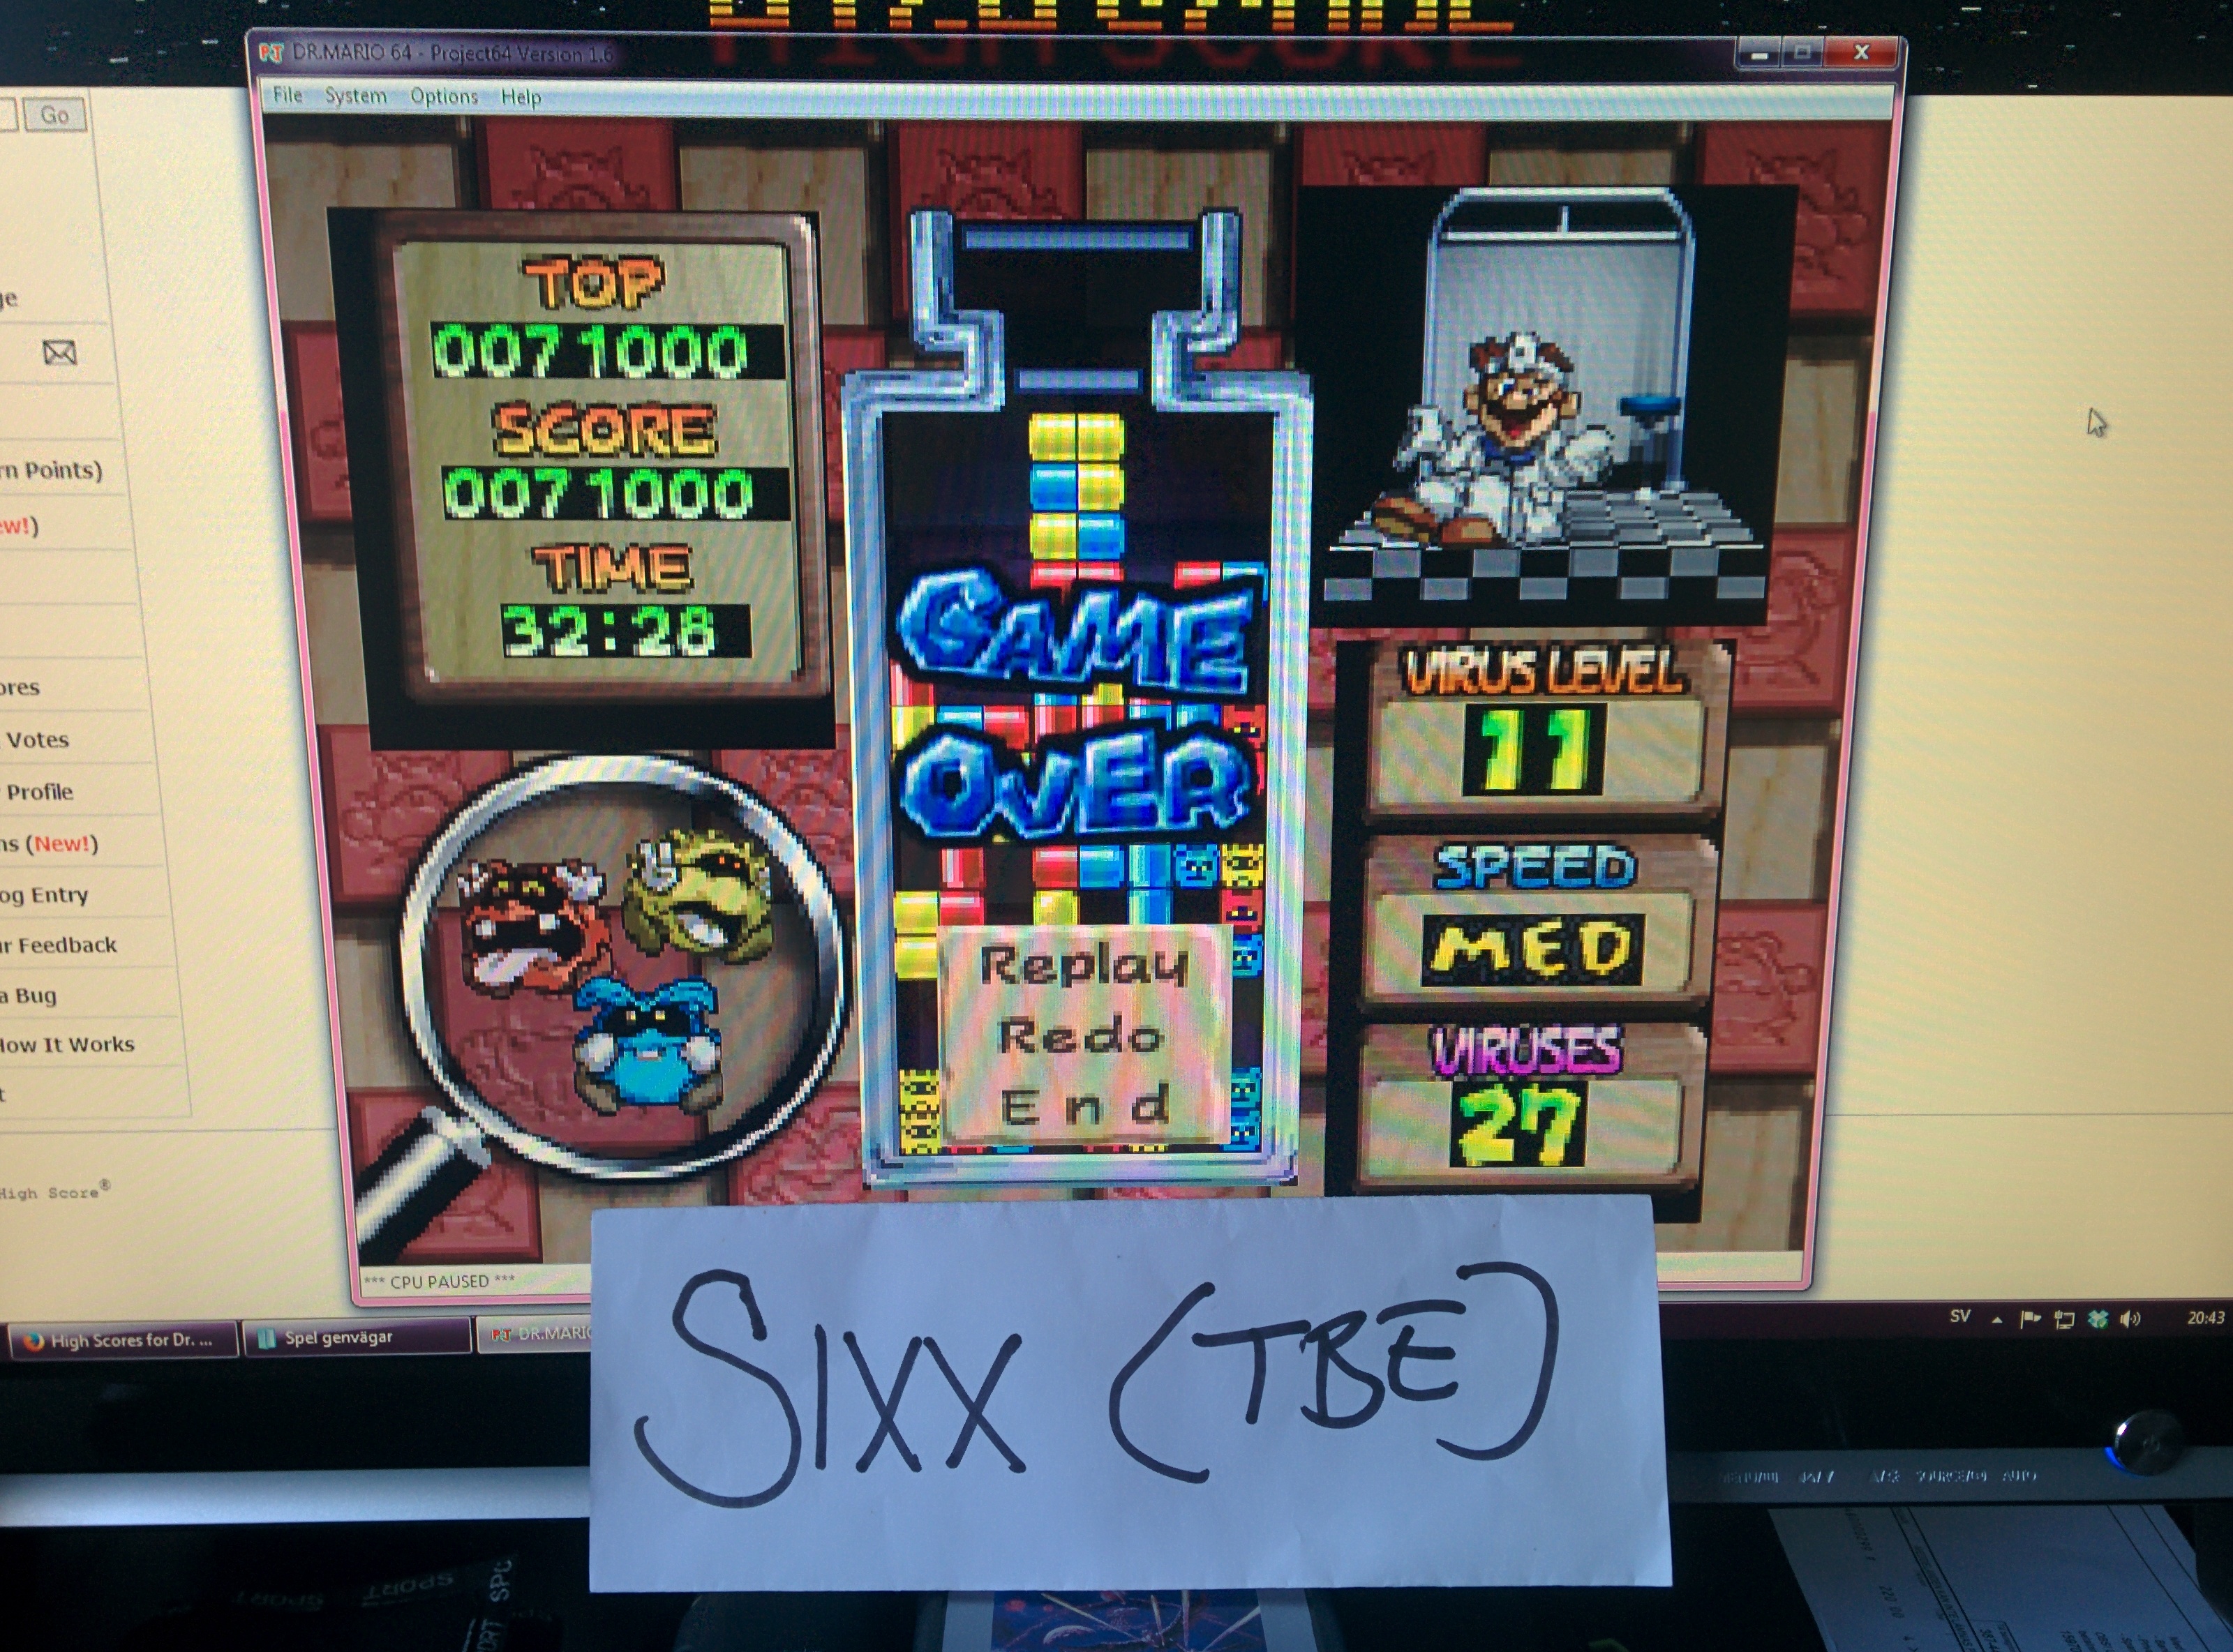 Sixx: Dr. Mario 64: Classic (N64 Emulated) 71,000 points on 2014-07-16 12:45:21